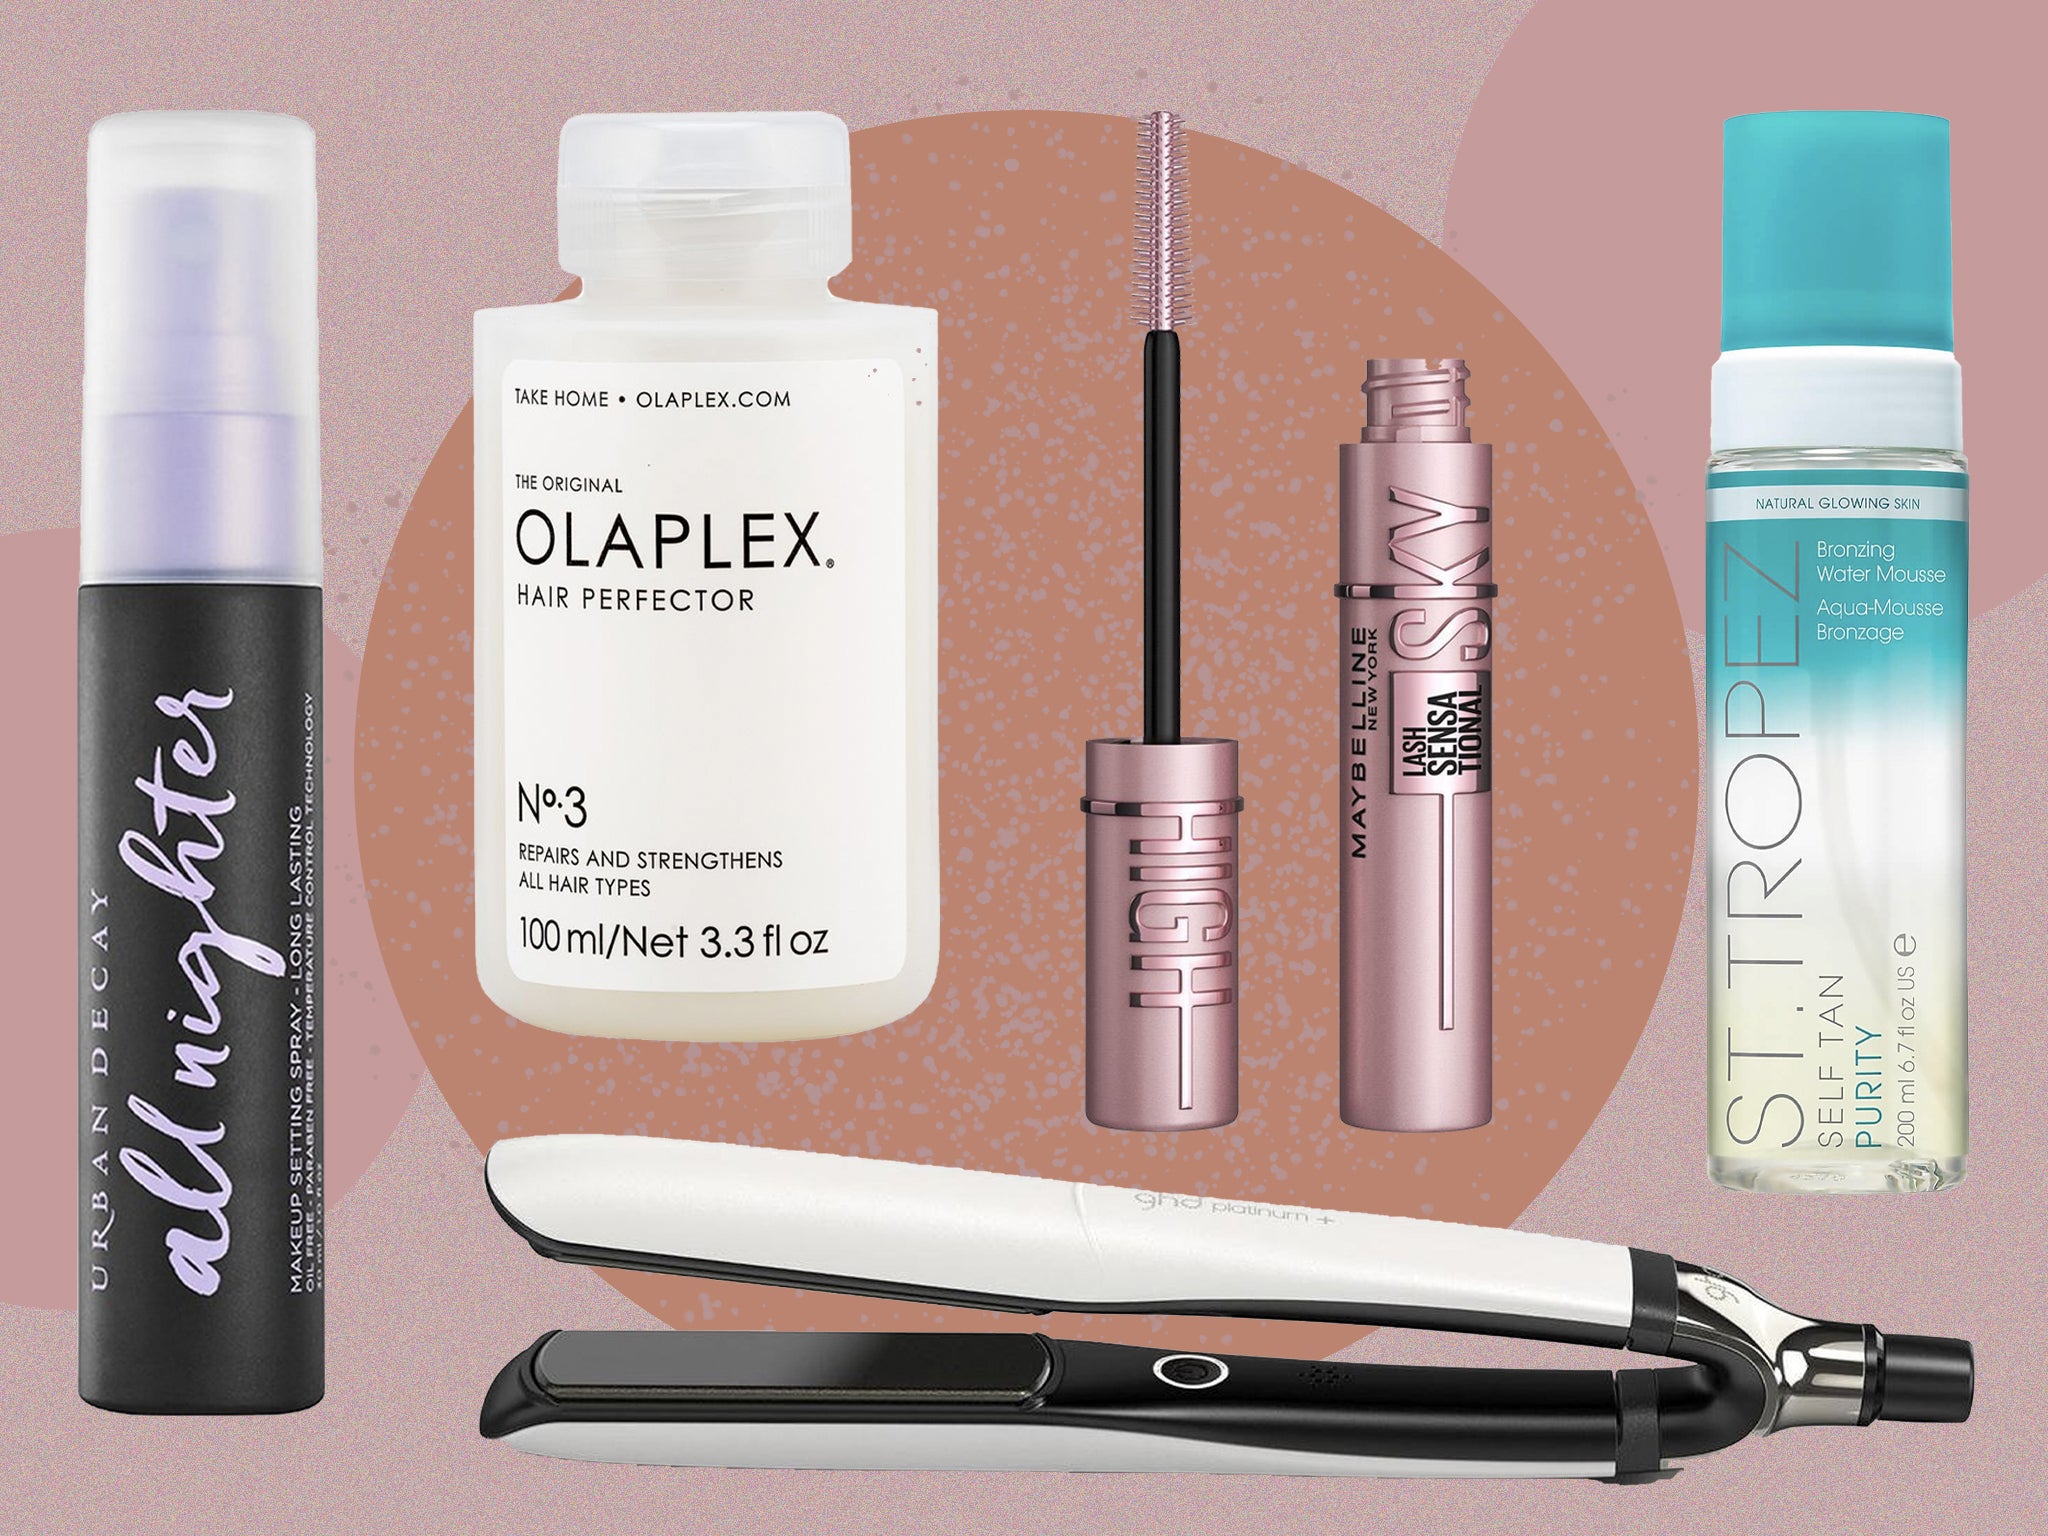 Amazon beauty: The makeup, skincare and hair brands you didn't know you  could shop | The Independent